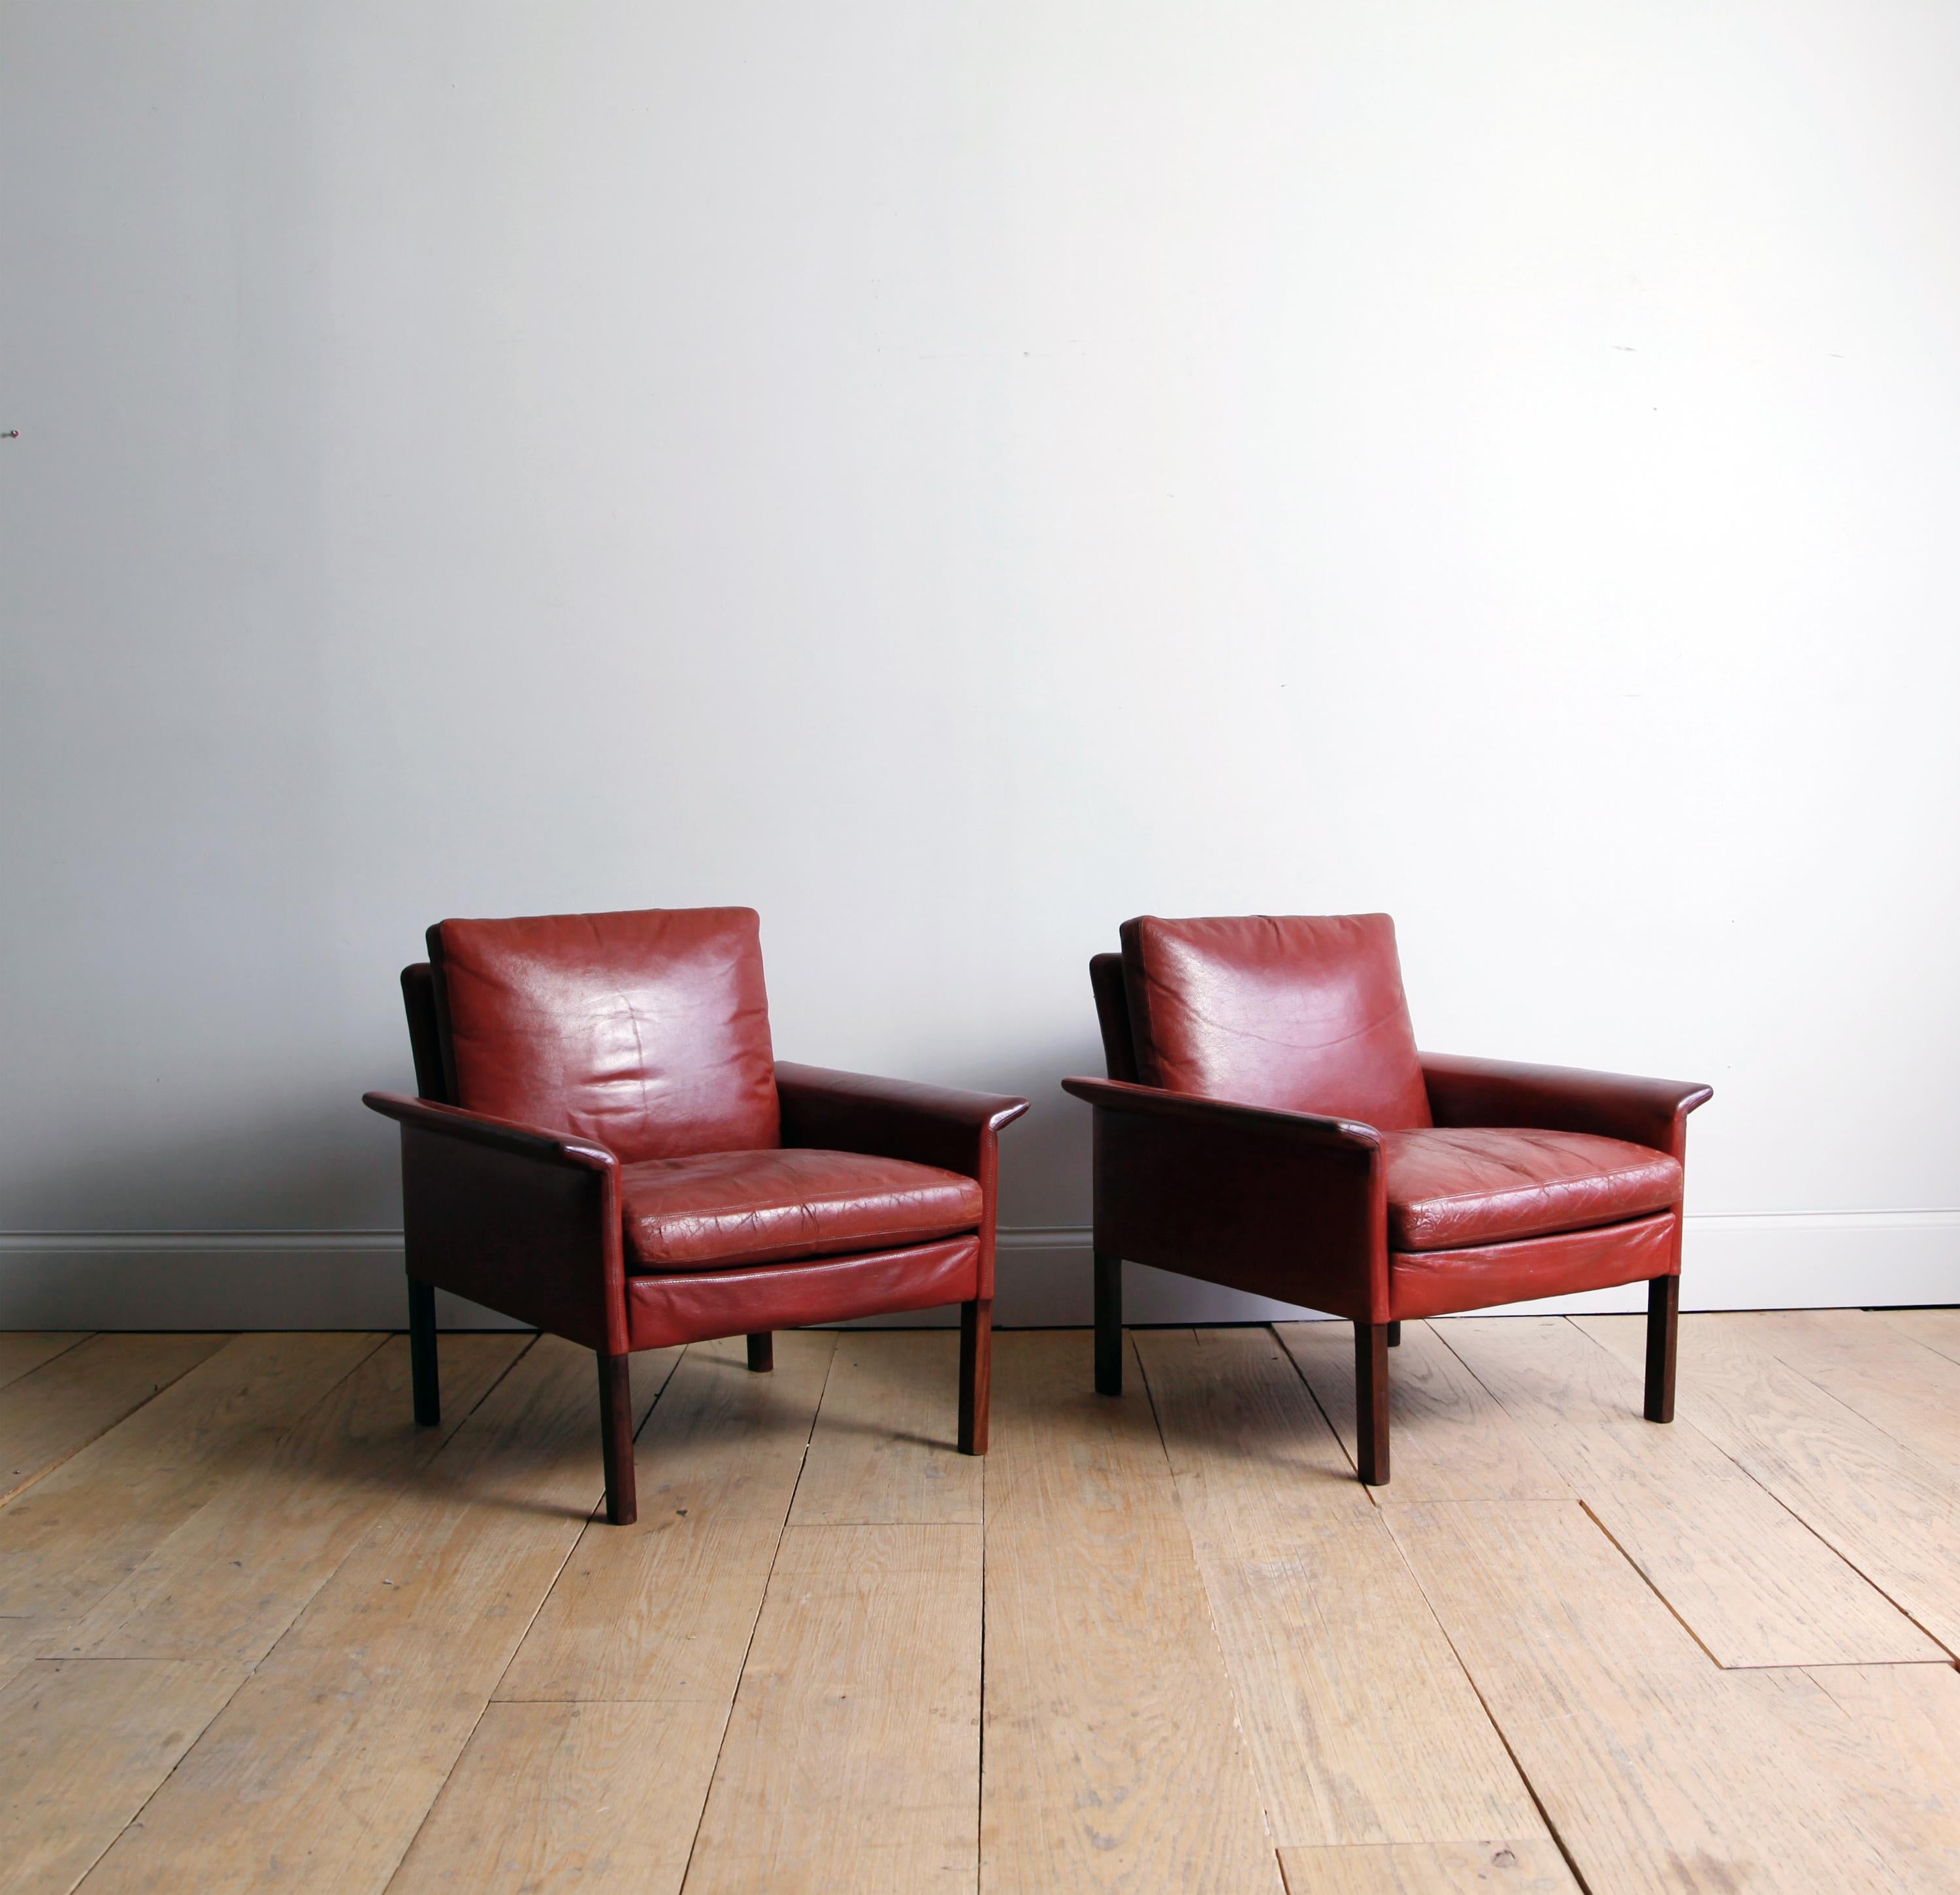 A cabinet maker by training, the Danish Hans Olsen studied at age 30 with the great architect-designer Kaare Klint. He was interested in innovative materials, and comfortable design.

A pair of rosewood armchairs in their original oxblood leather